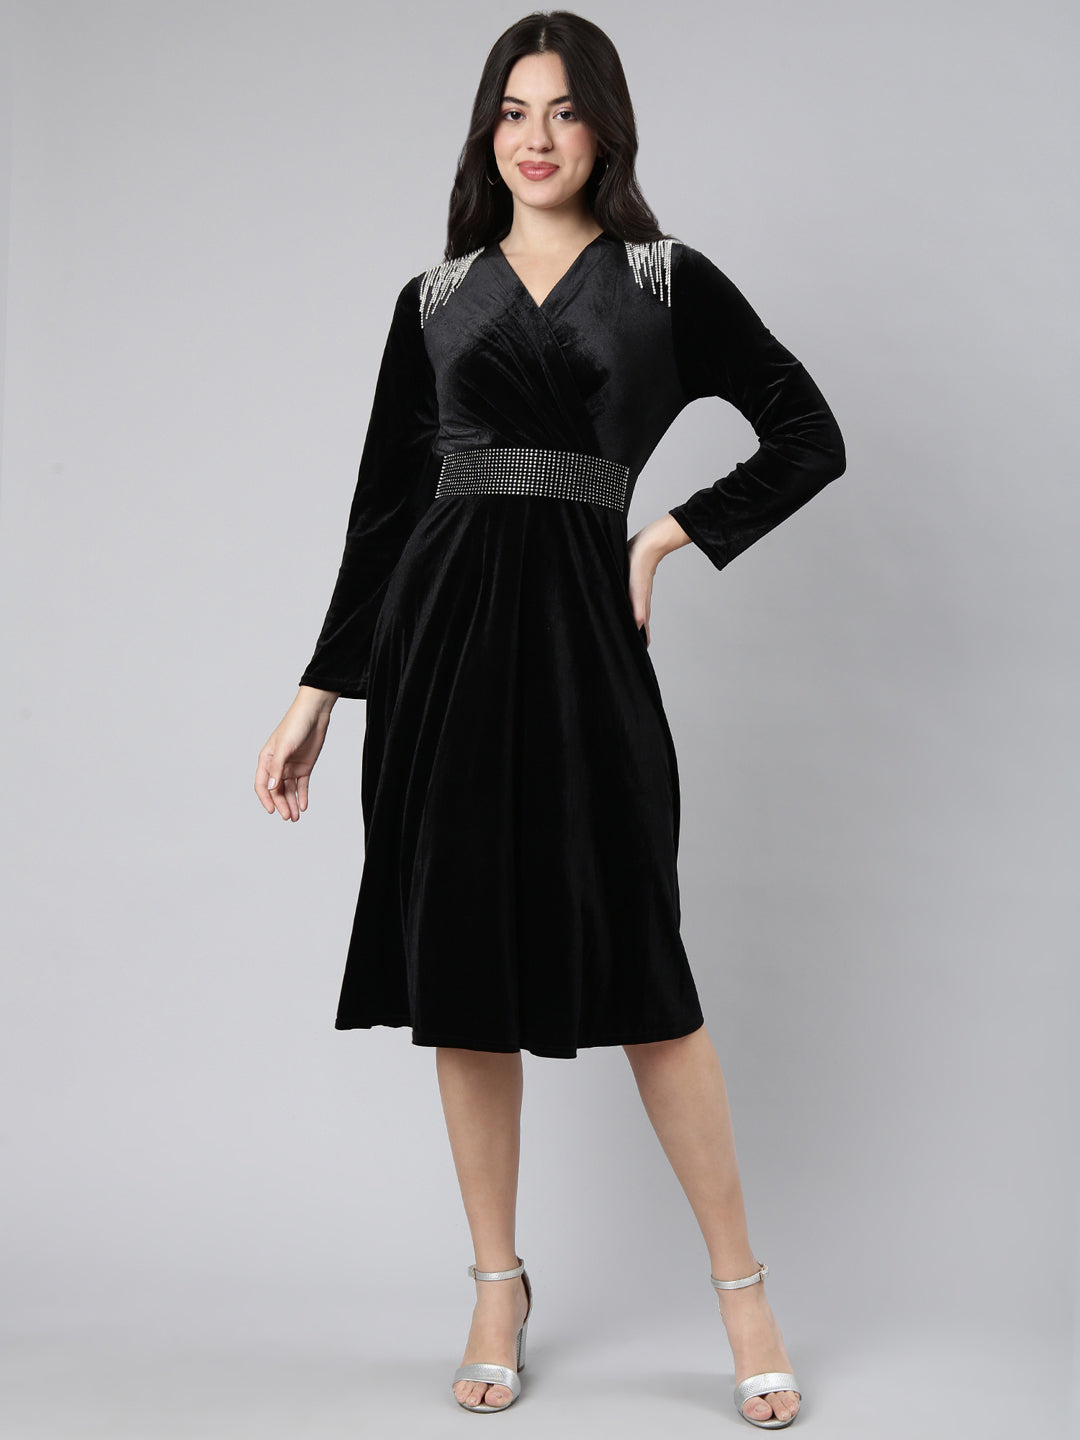 Women Solid Black Fit and Flare Dress comes with Belt